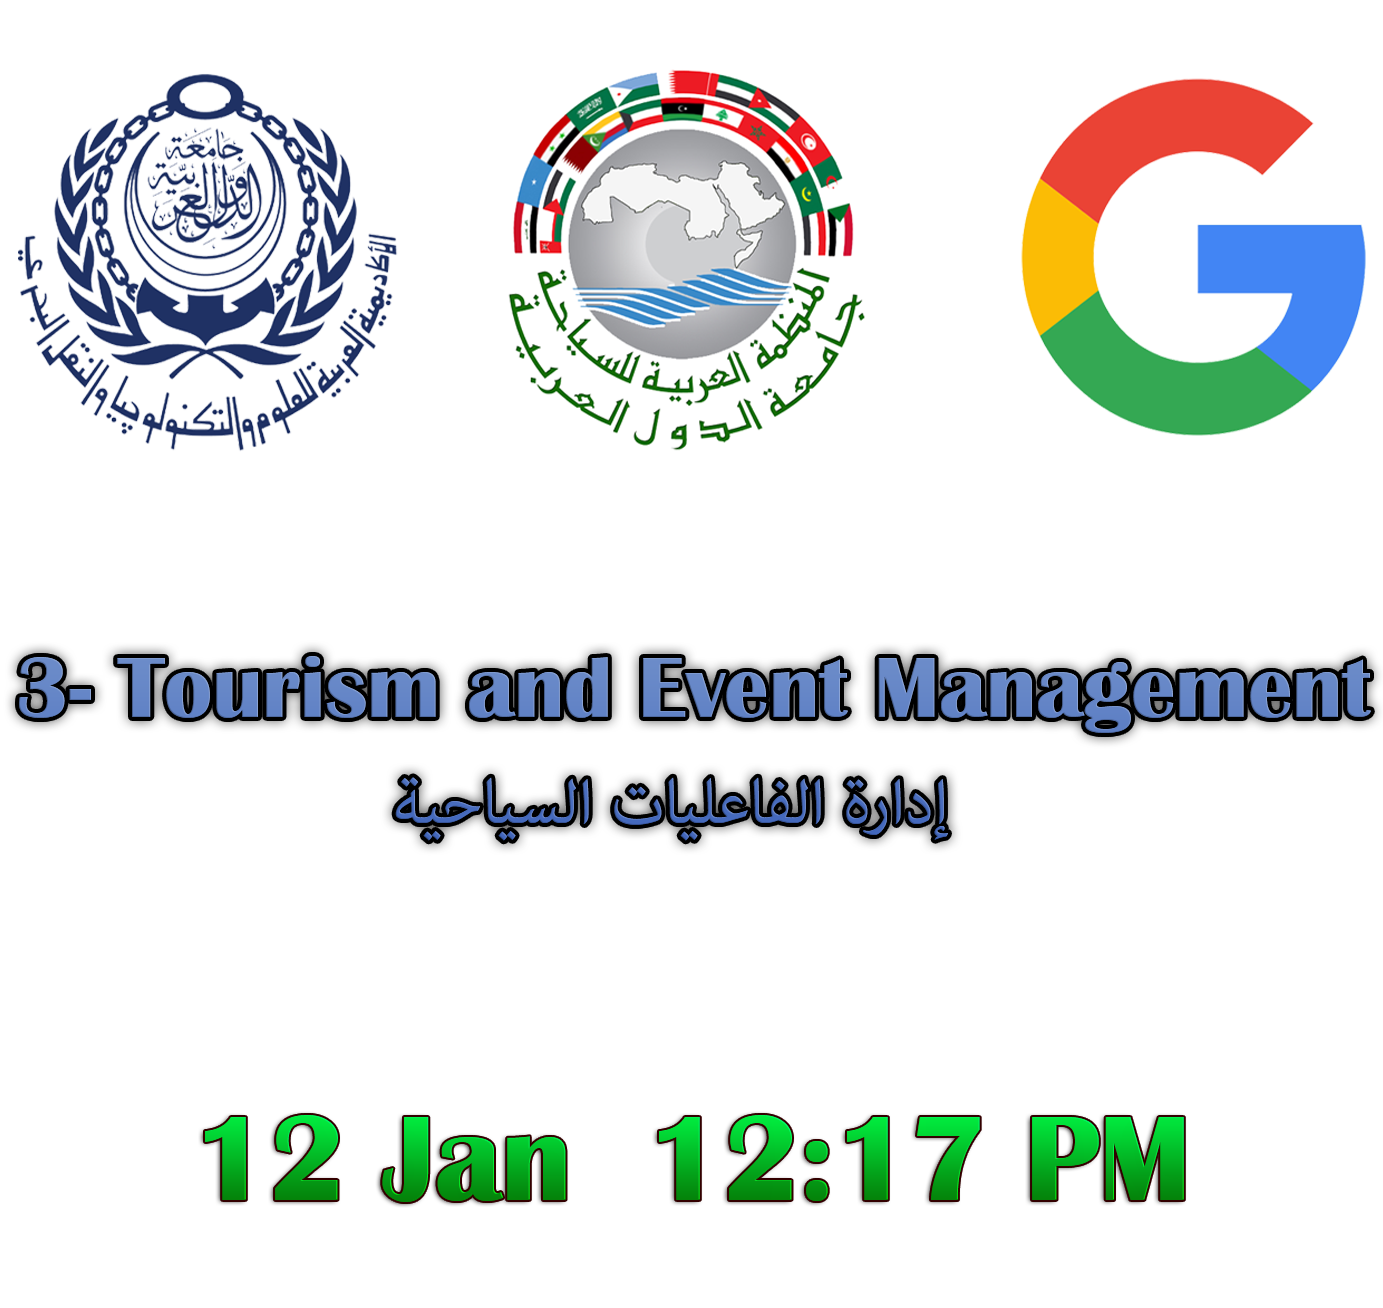 Tourism and Event Management Course